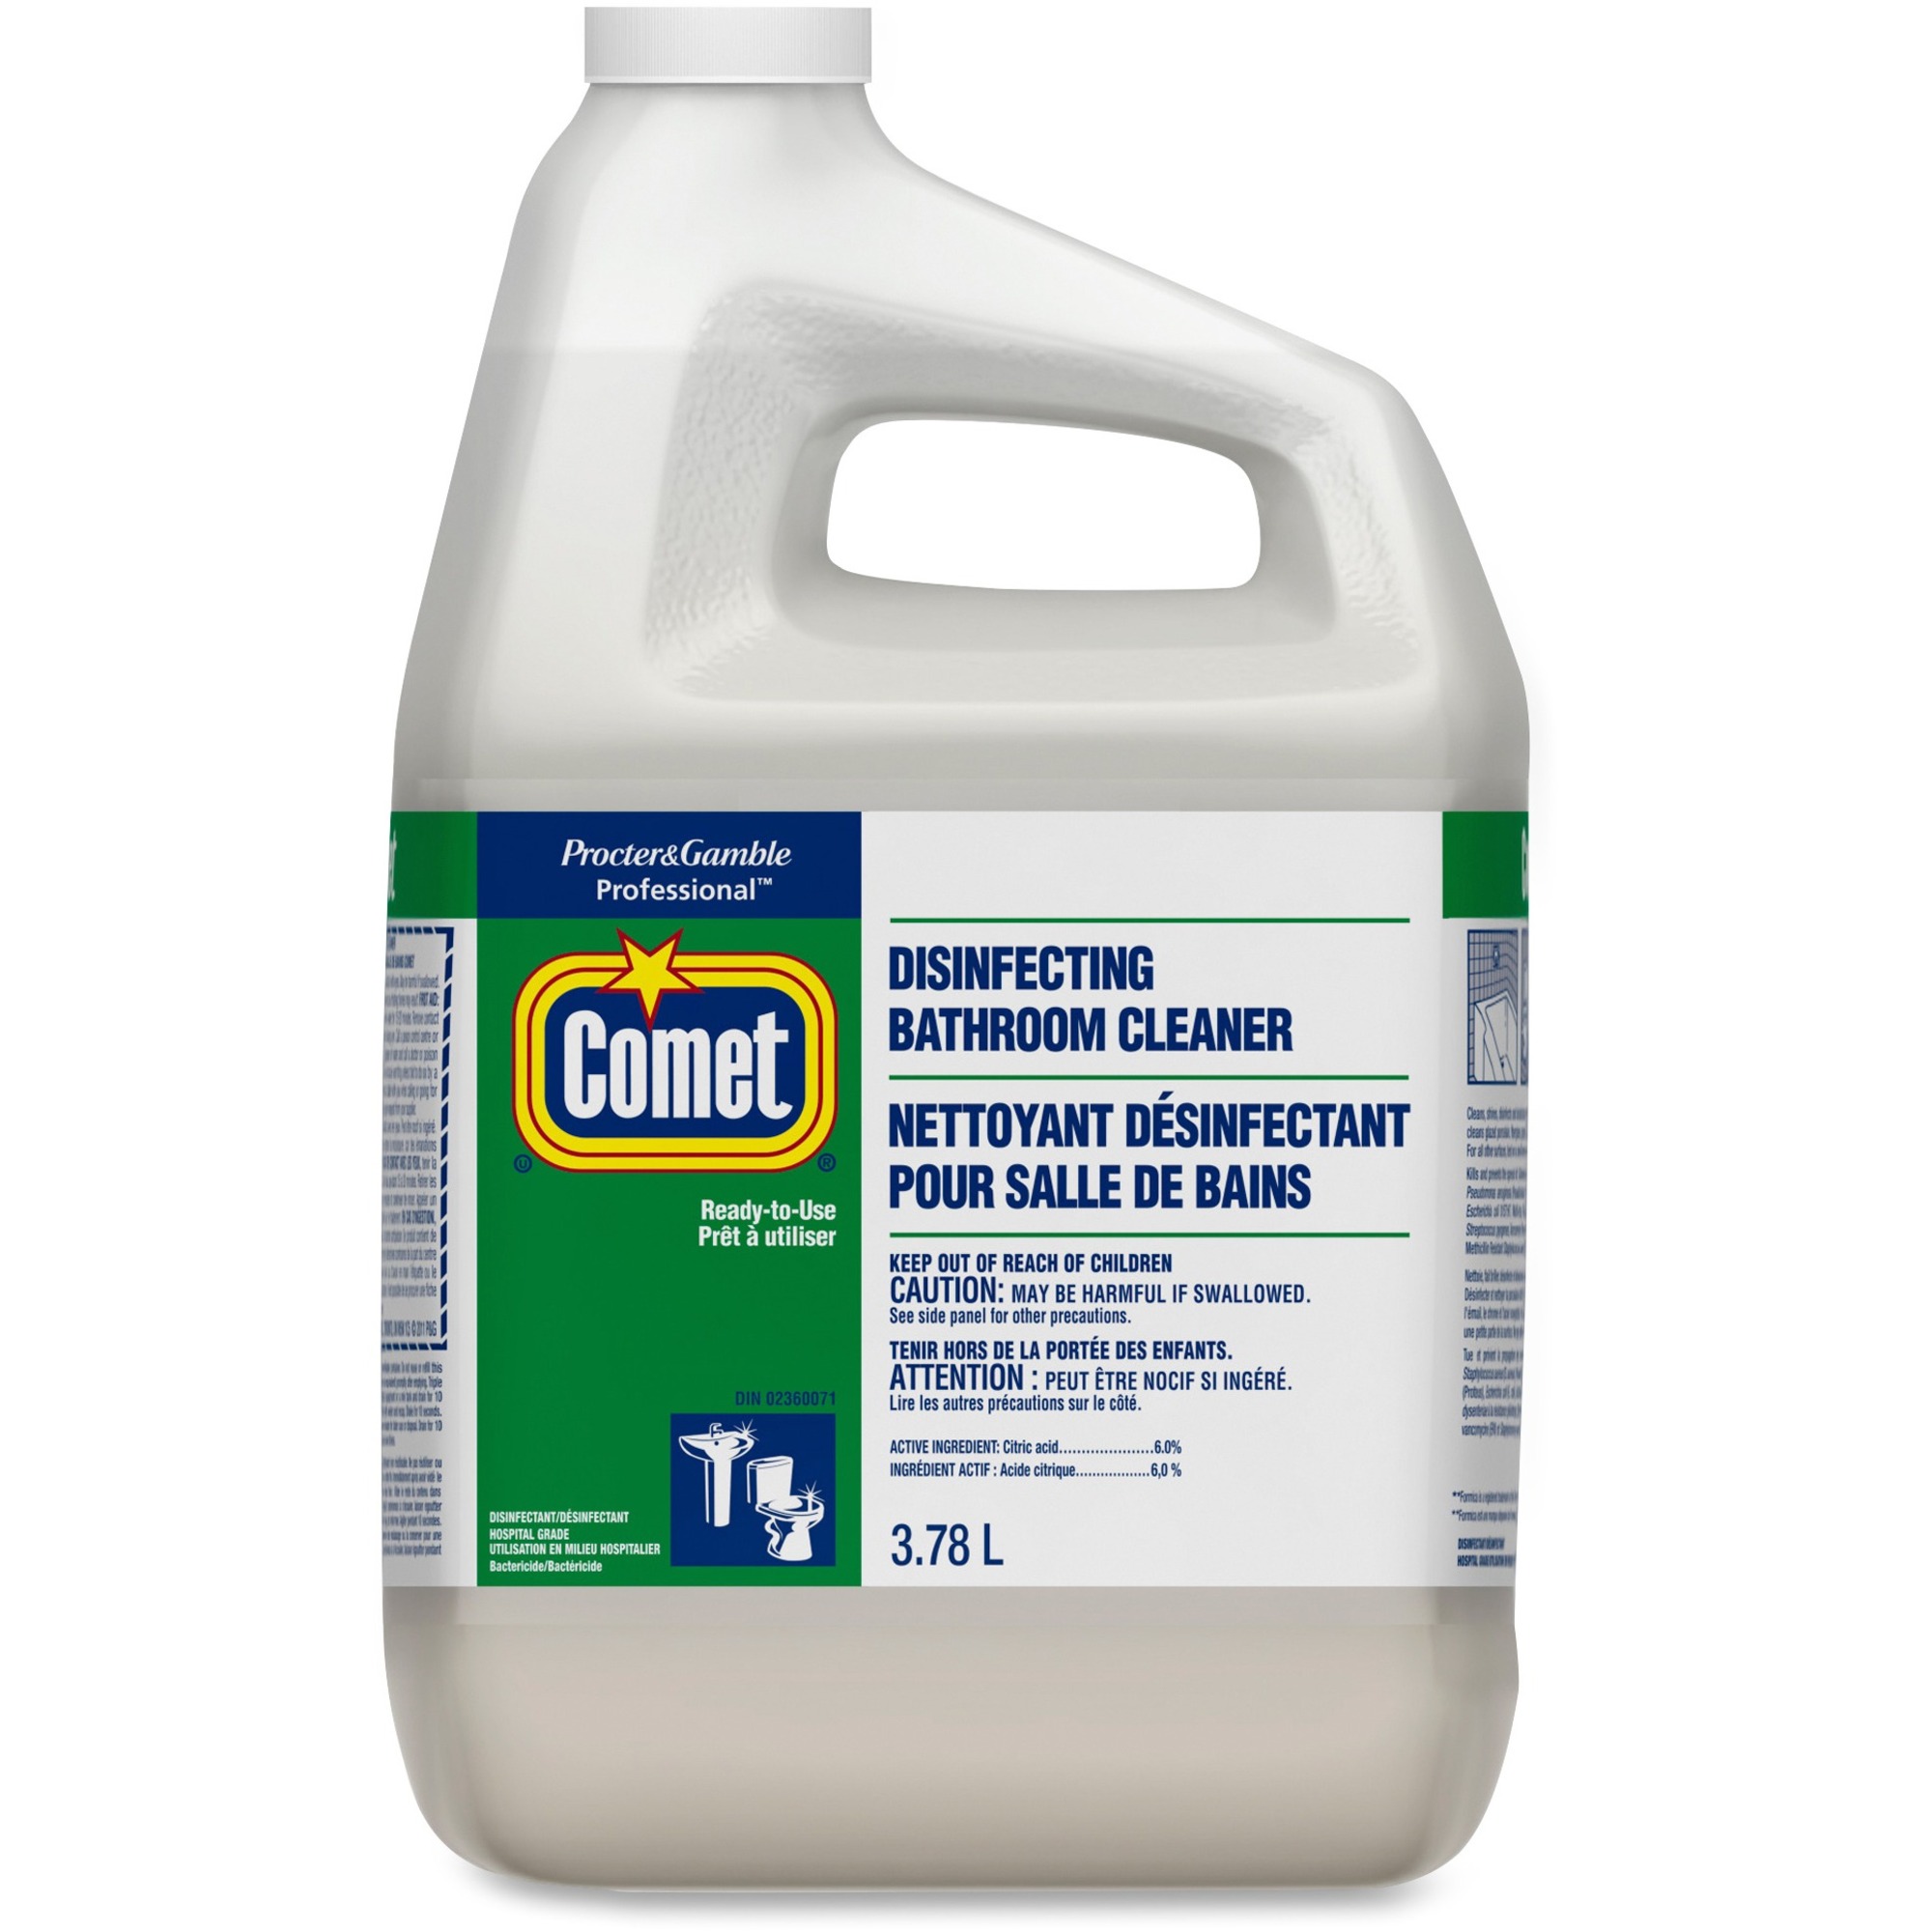 Glennco Office Products Ltd Cleaning Breakroom Cleaning Supplies Cleaners Disinfectants Bathroom Cleaners Comet Bathroom Cleaner Refill 1278 Fl Oz 4 Quart 1 Each